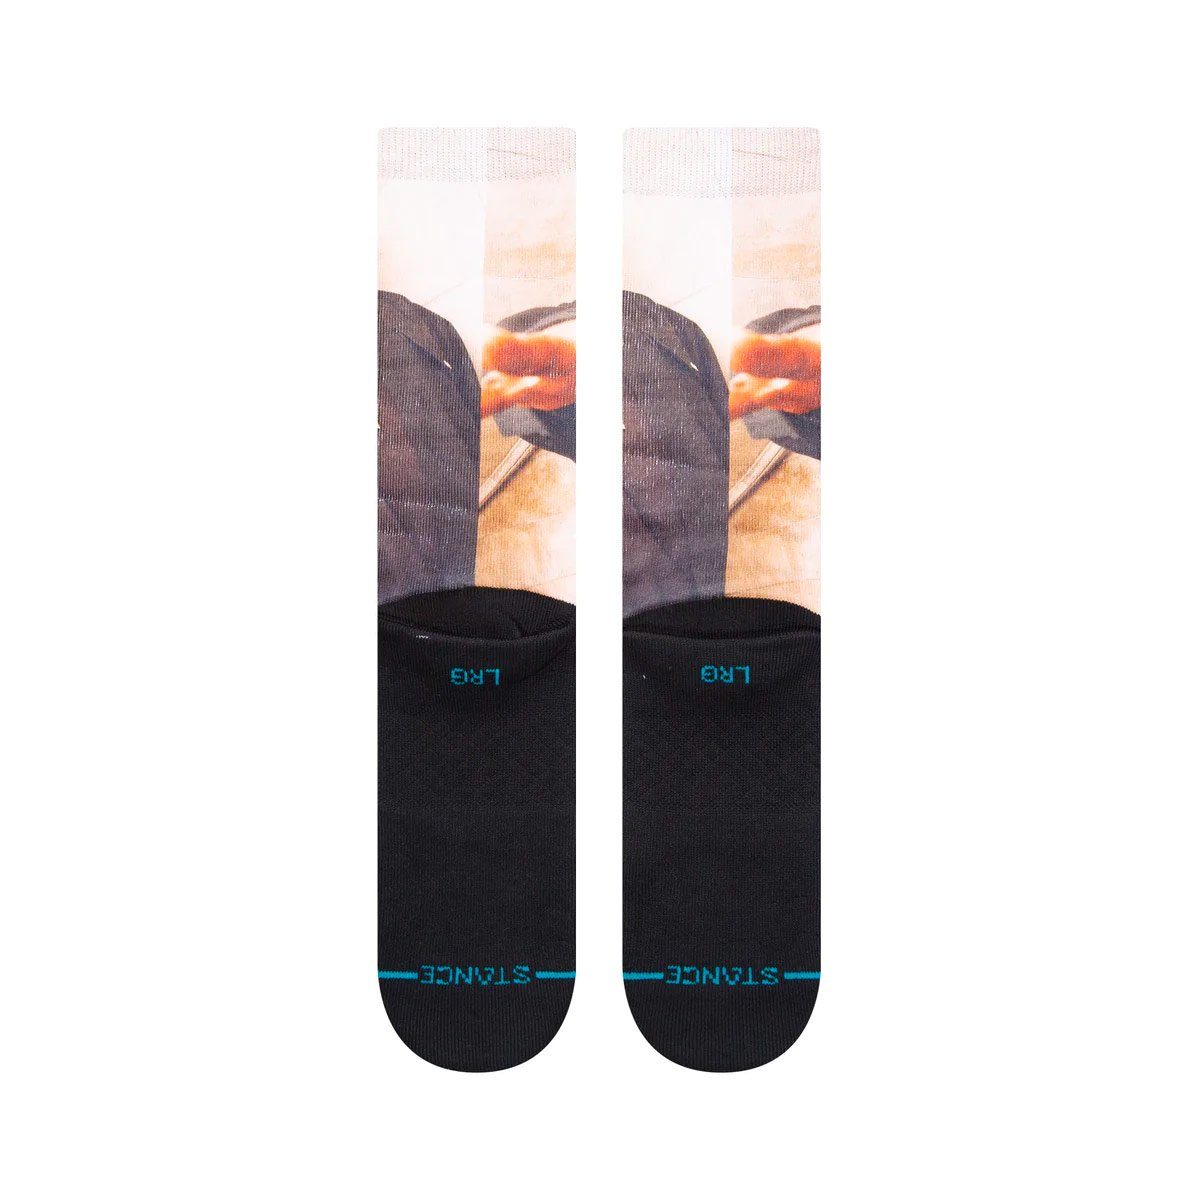 Stance Freizeitsocken black Notorious Paar) Stance x (1 B.I.G. The King NY Of - The